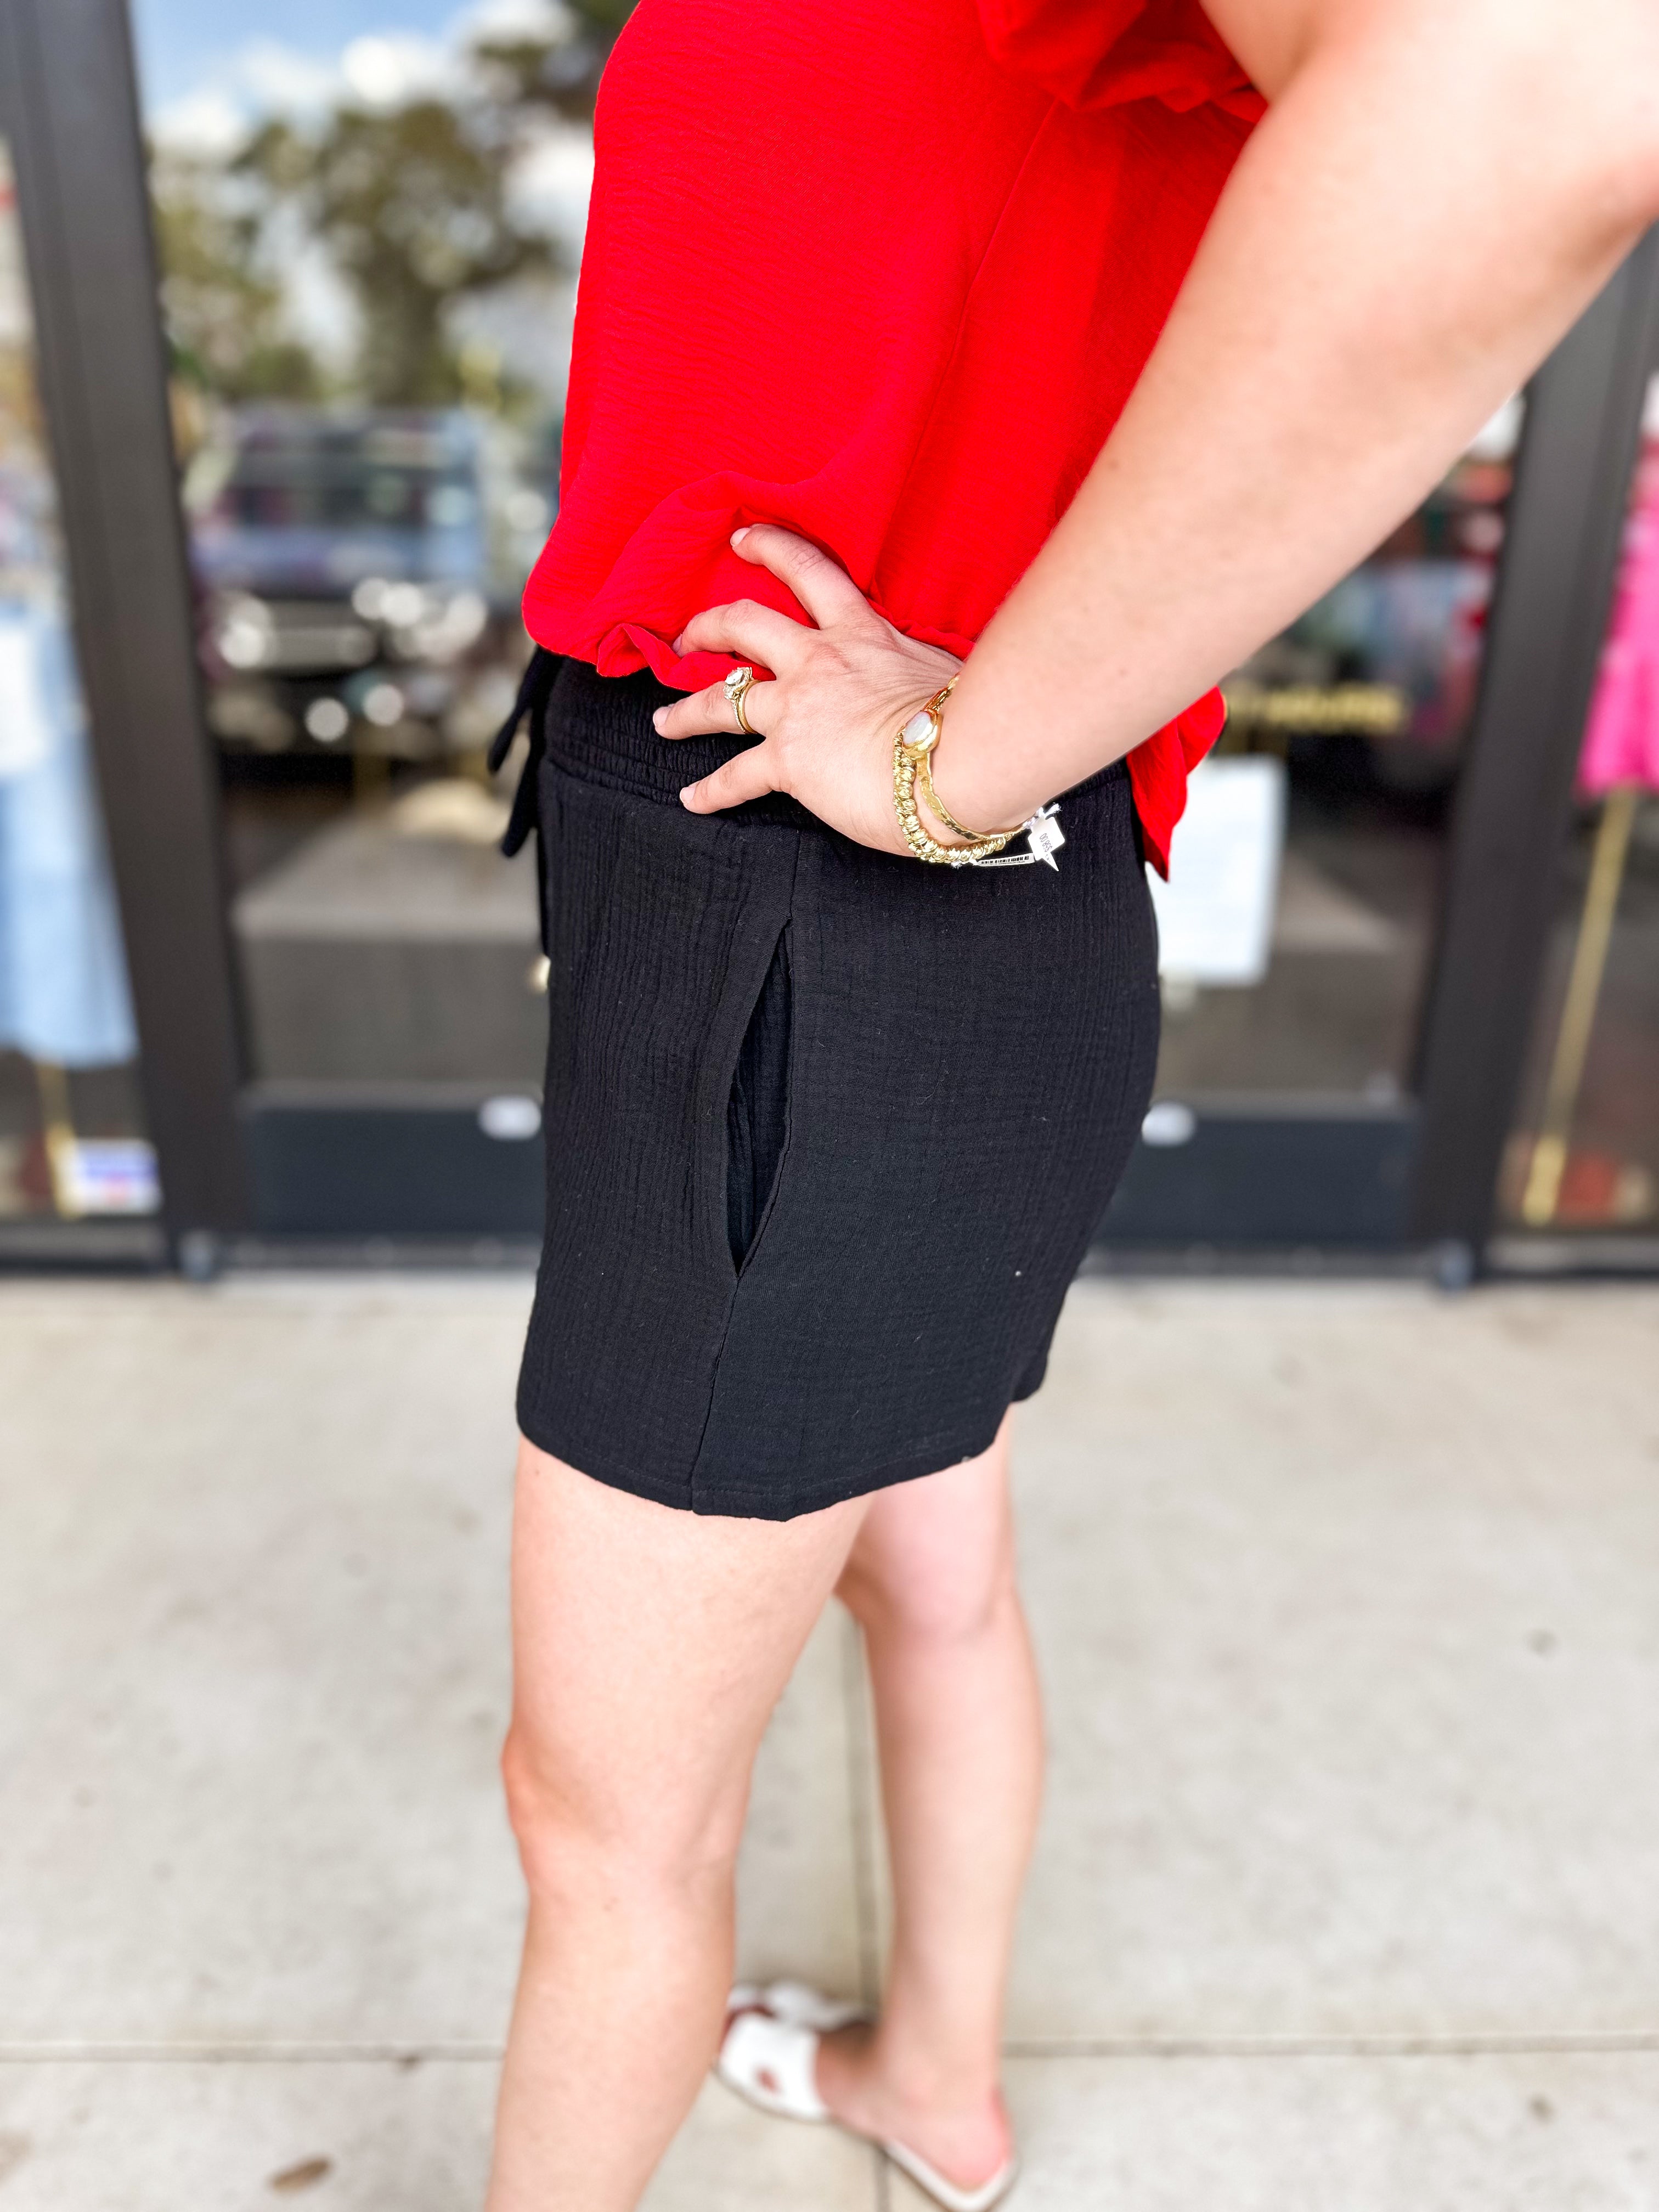 Black Gauze Shorts-410 Shorts/Skirts-ALLIE ROSE-July & June Women's Fashion Boutique Located in San Antonio, Texas